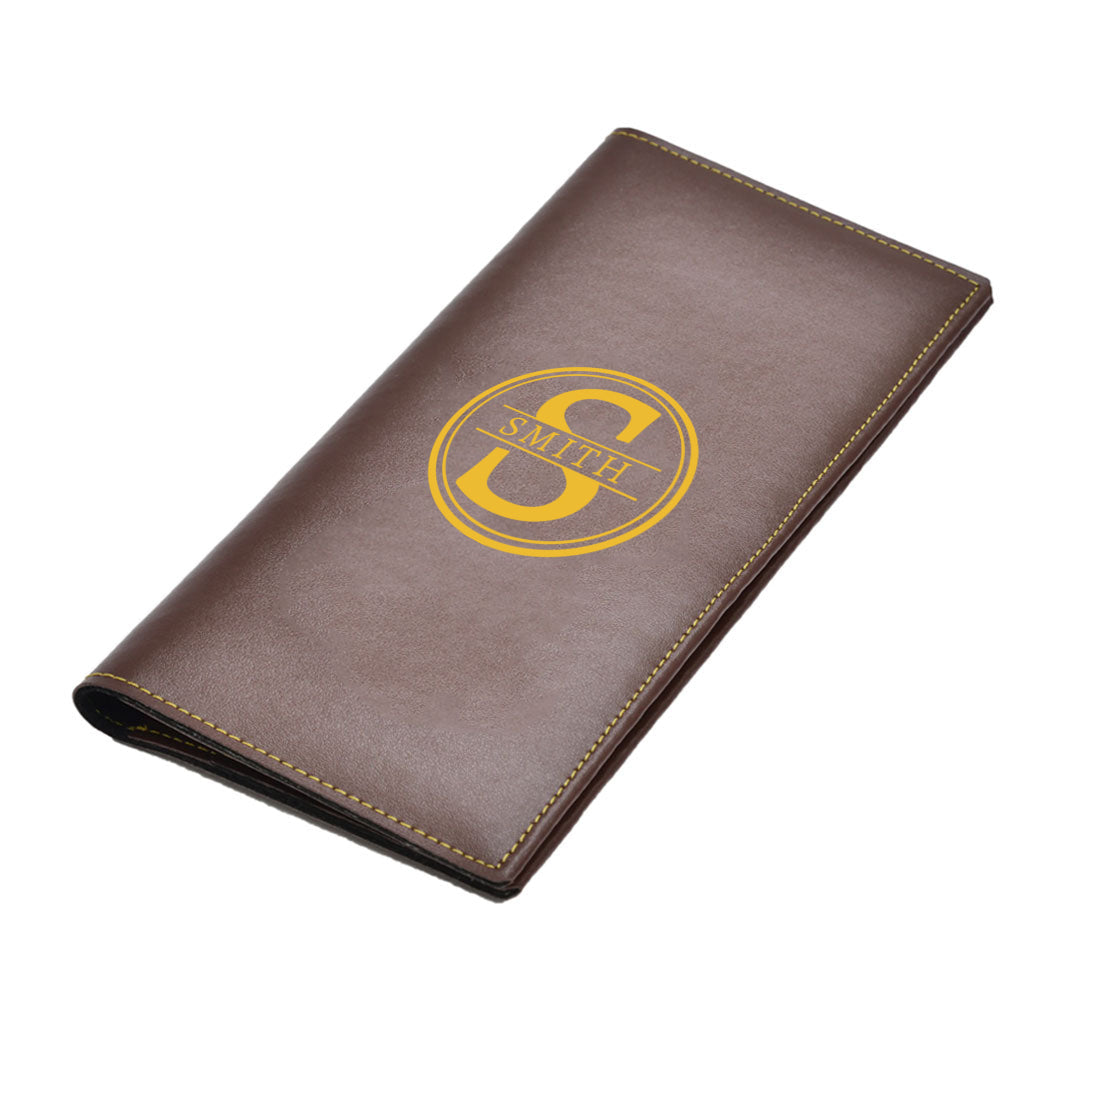 Personalized Passport and Document Holder Travel Organizer Leather- Add Name